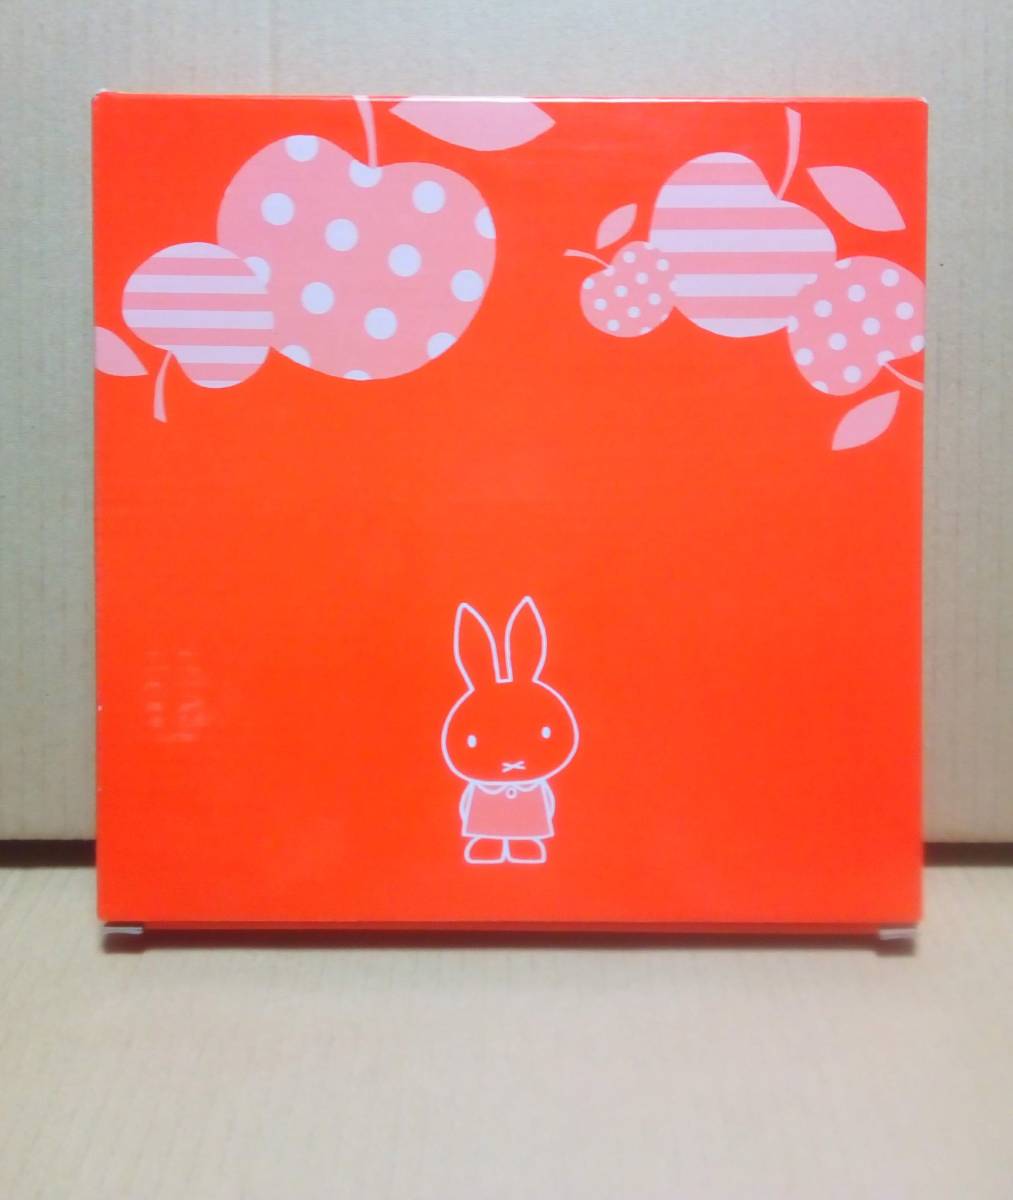  not for sale * Lawson × Fuji bread * Miffy lunch plate *2014 year * Dick bruna 60 anniversary *< diameter approximately 21cm>